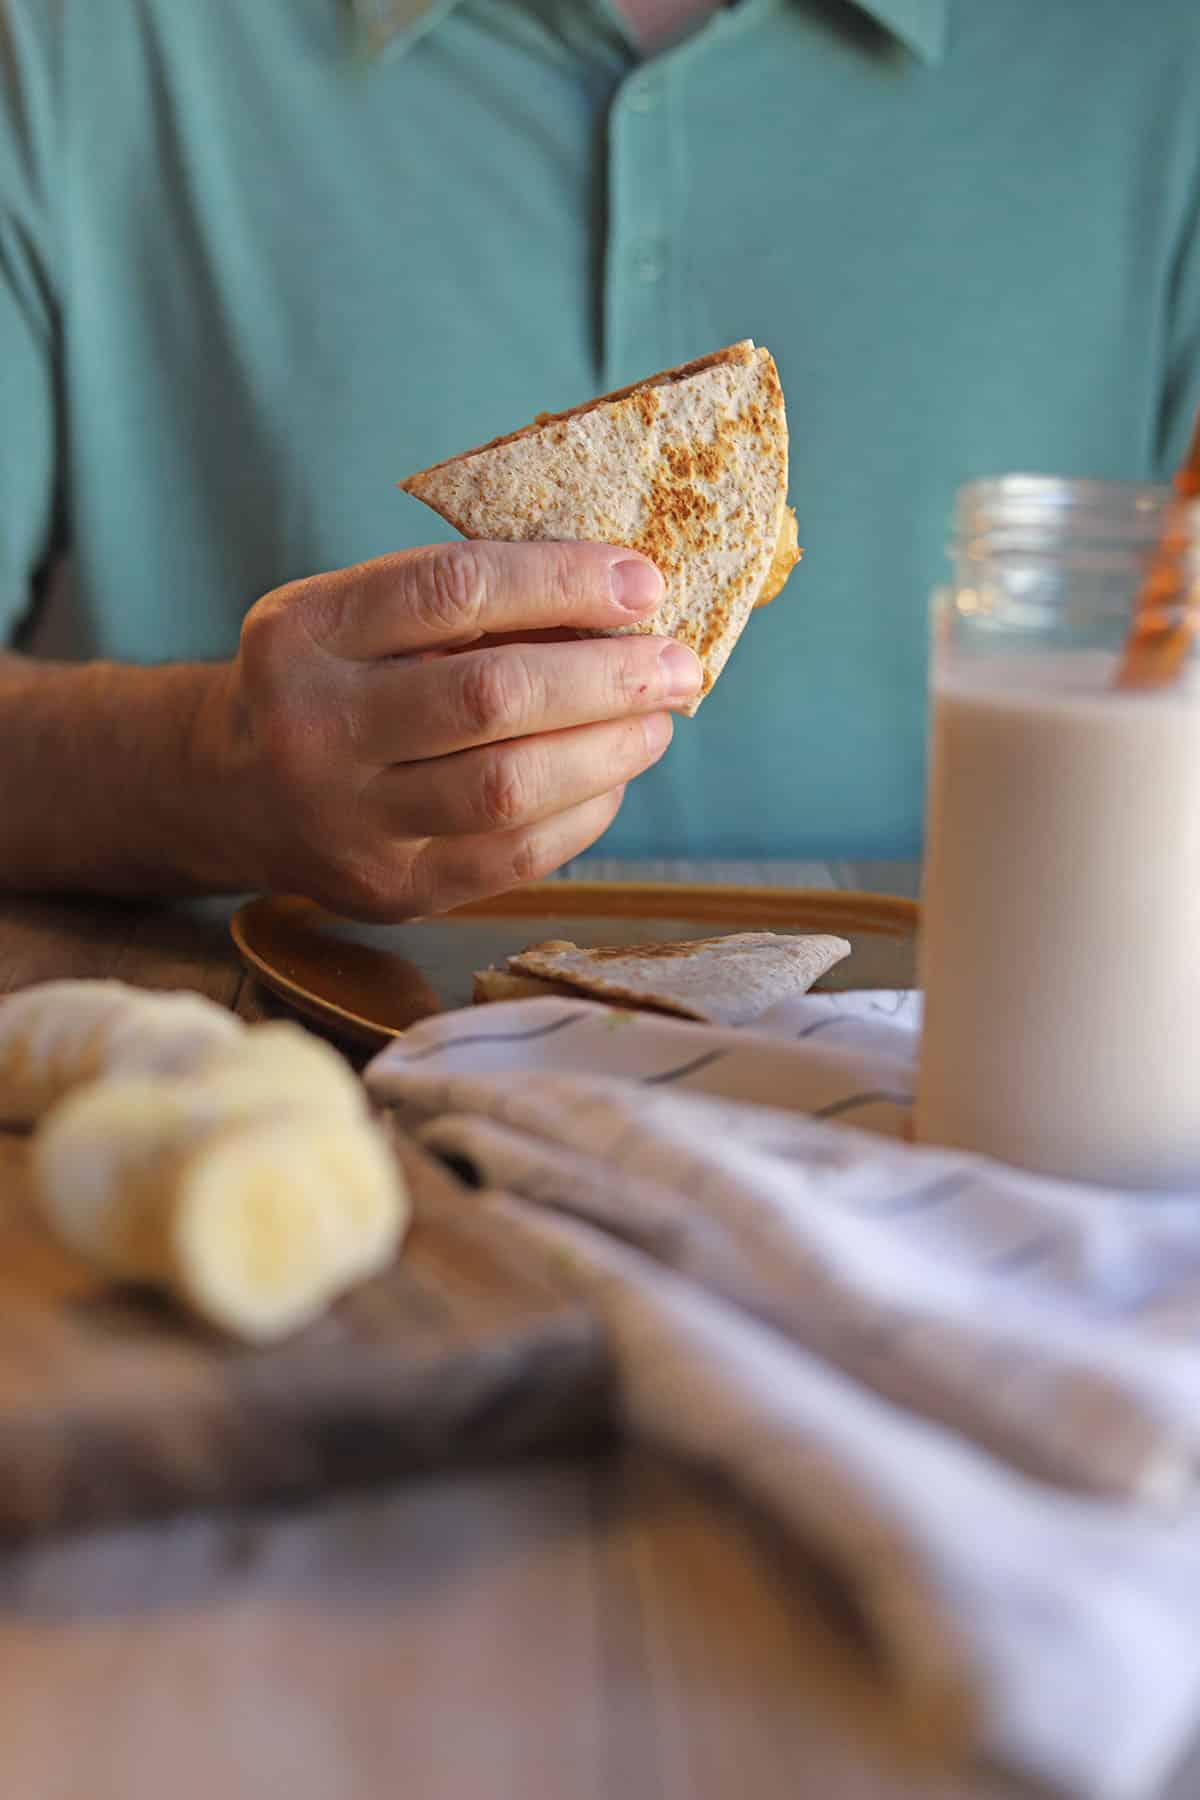 Hand holding peanut butter banana quesadilla by glass of non-dairy milk.